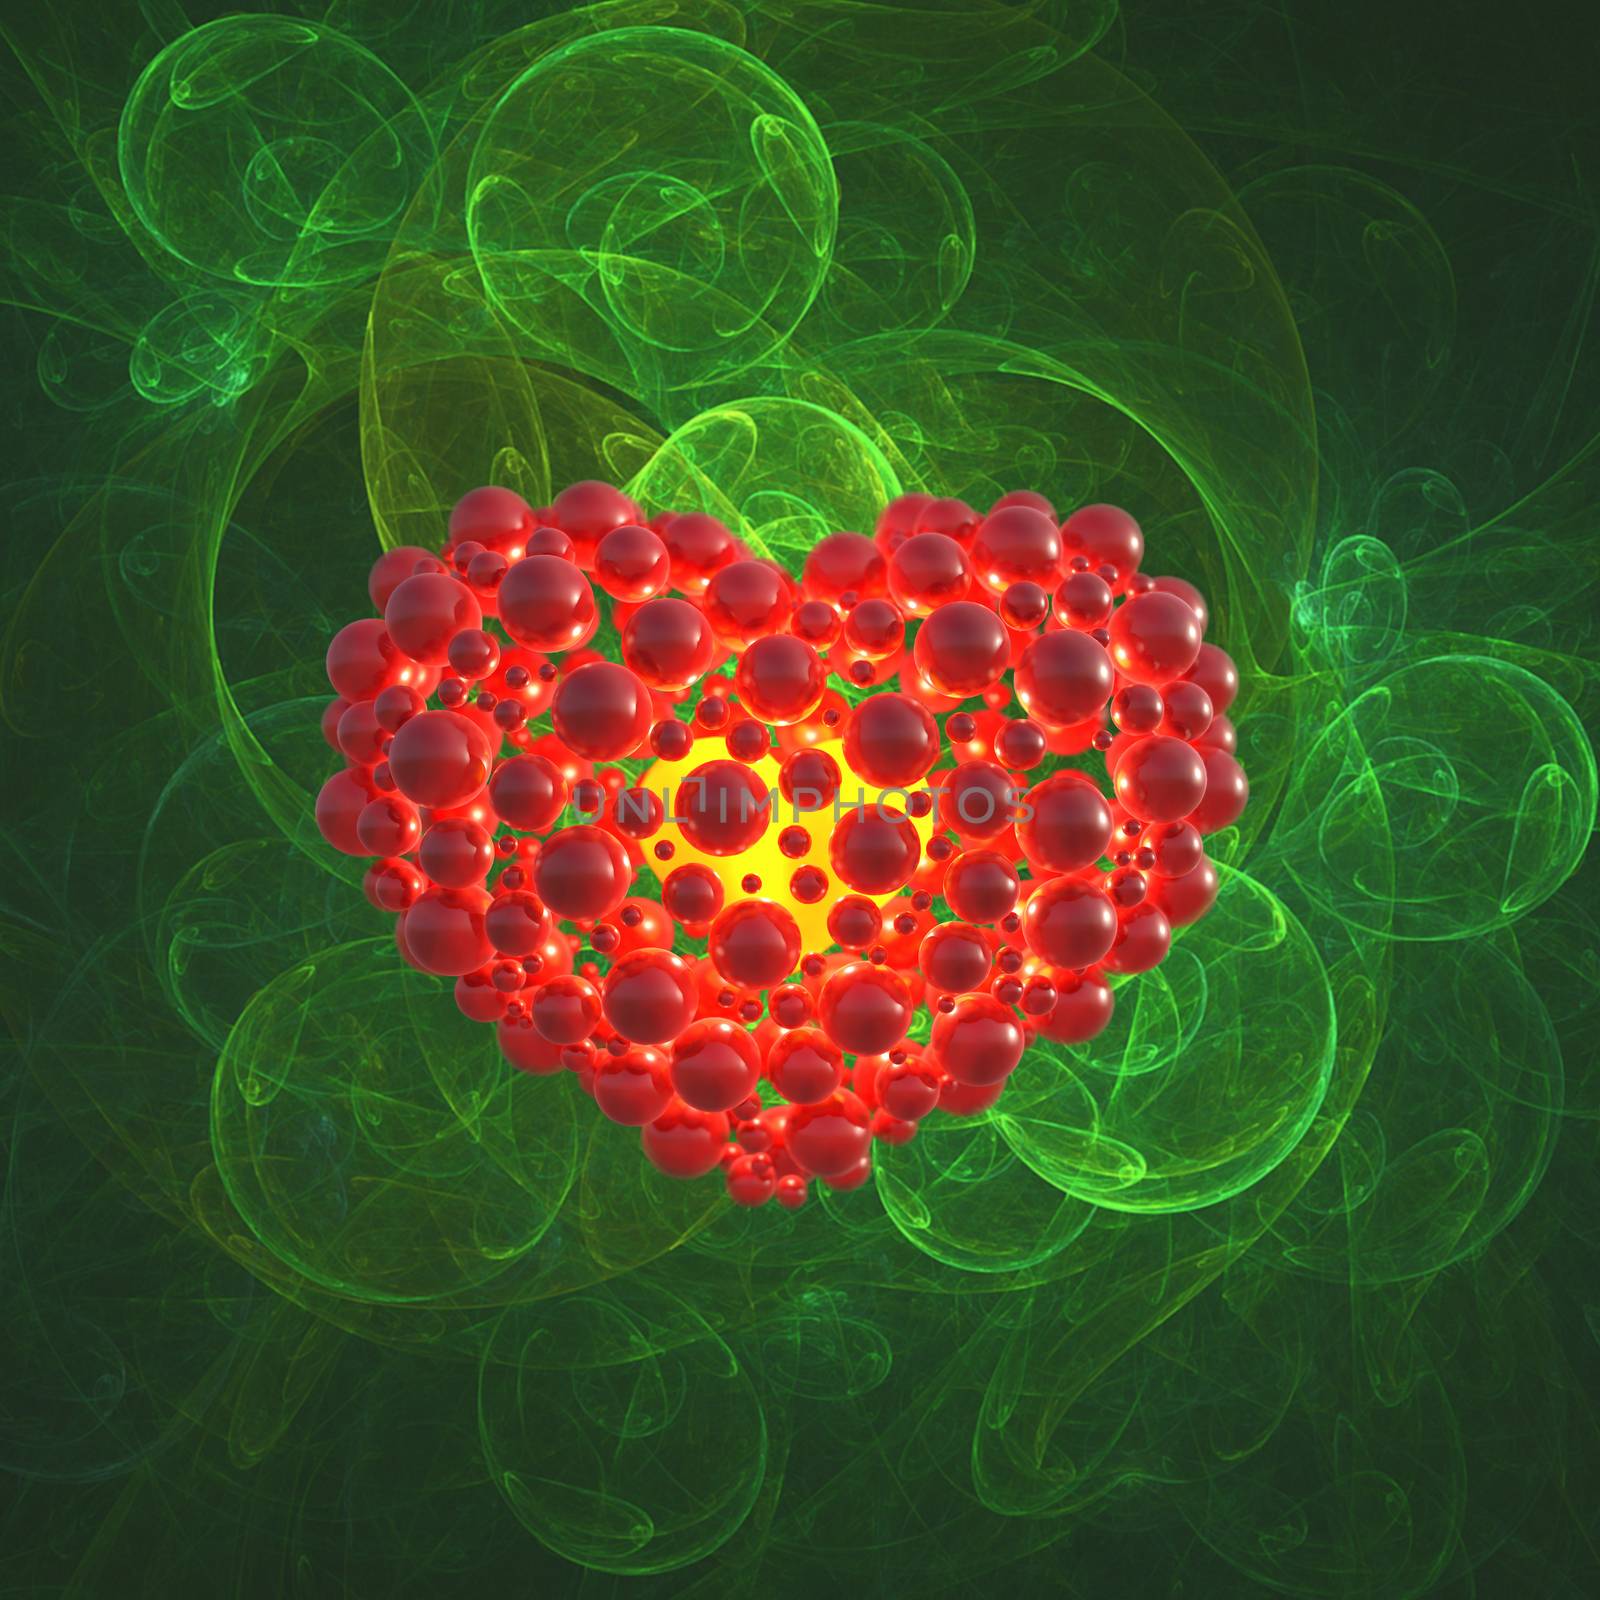 Red heart made of spheres with reflections isolated on green space background. Happy valentines day 3d illustration.